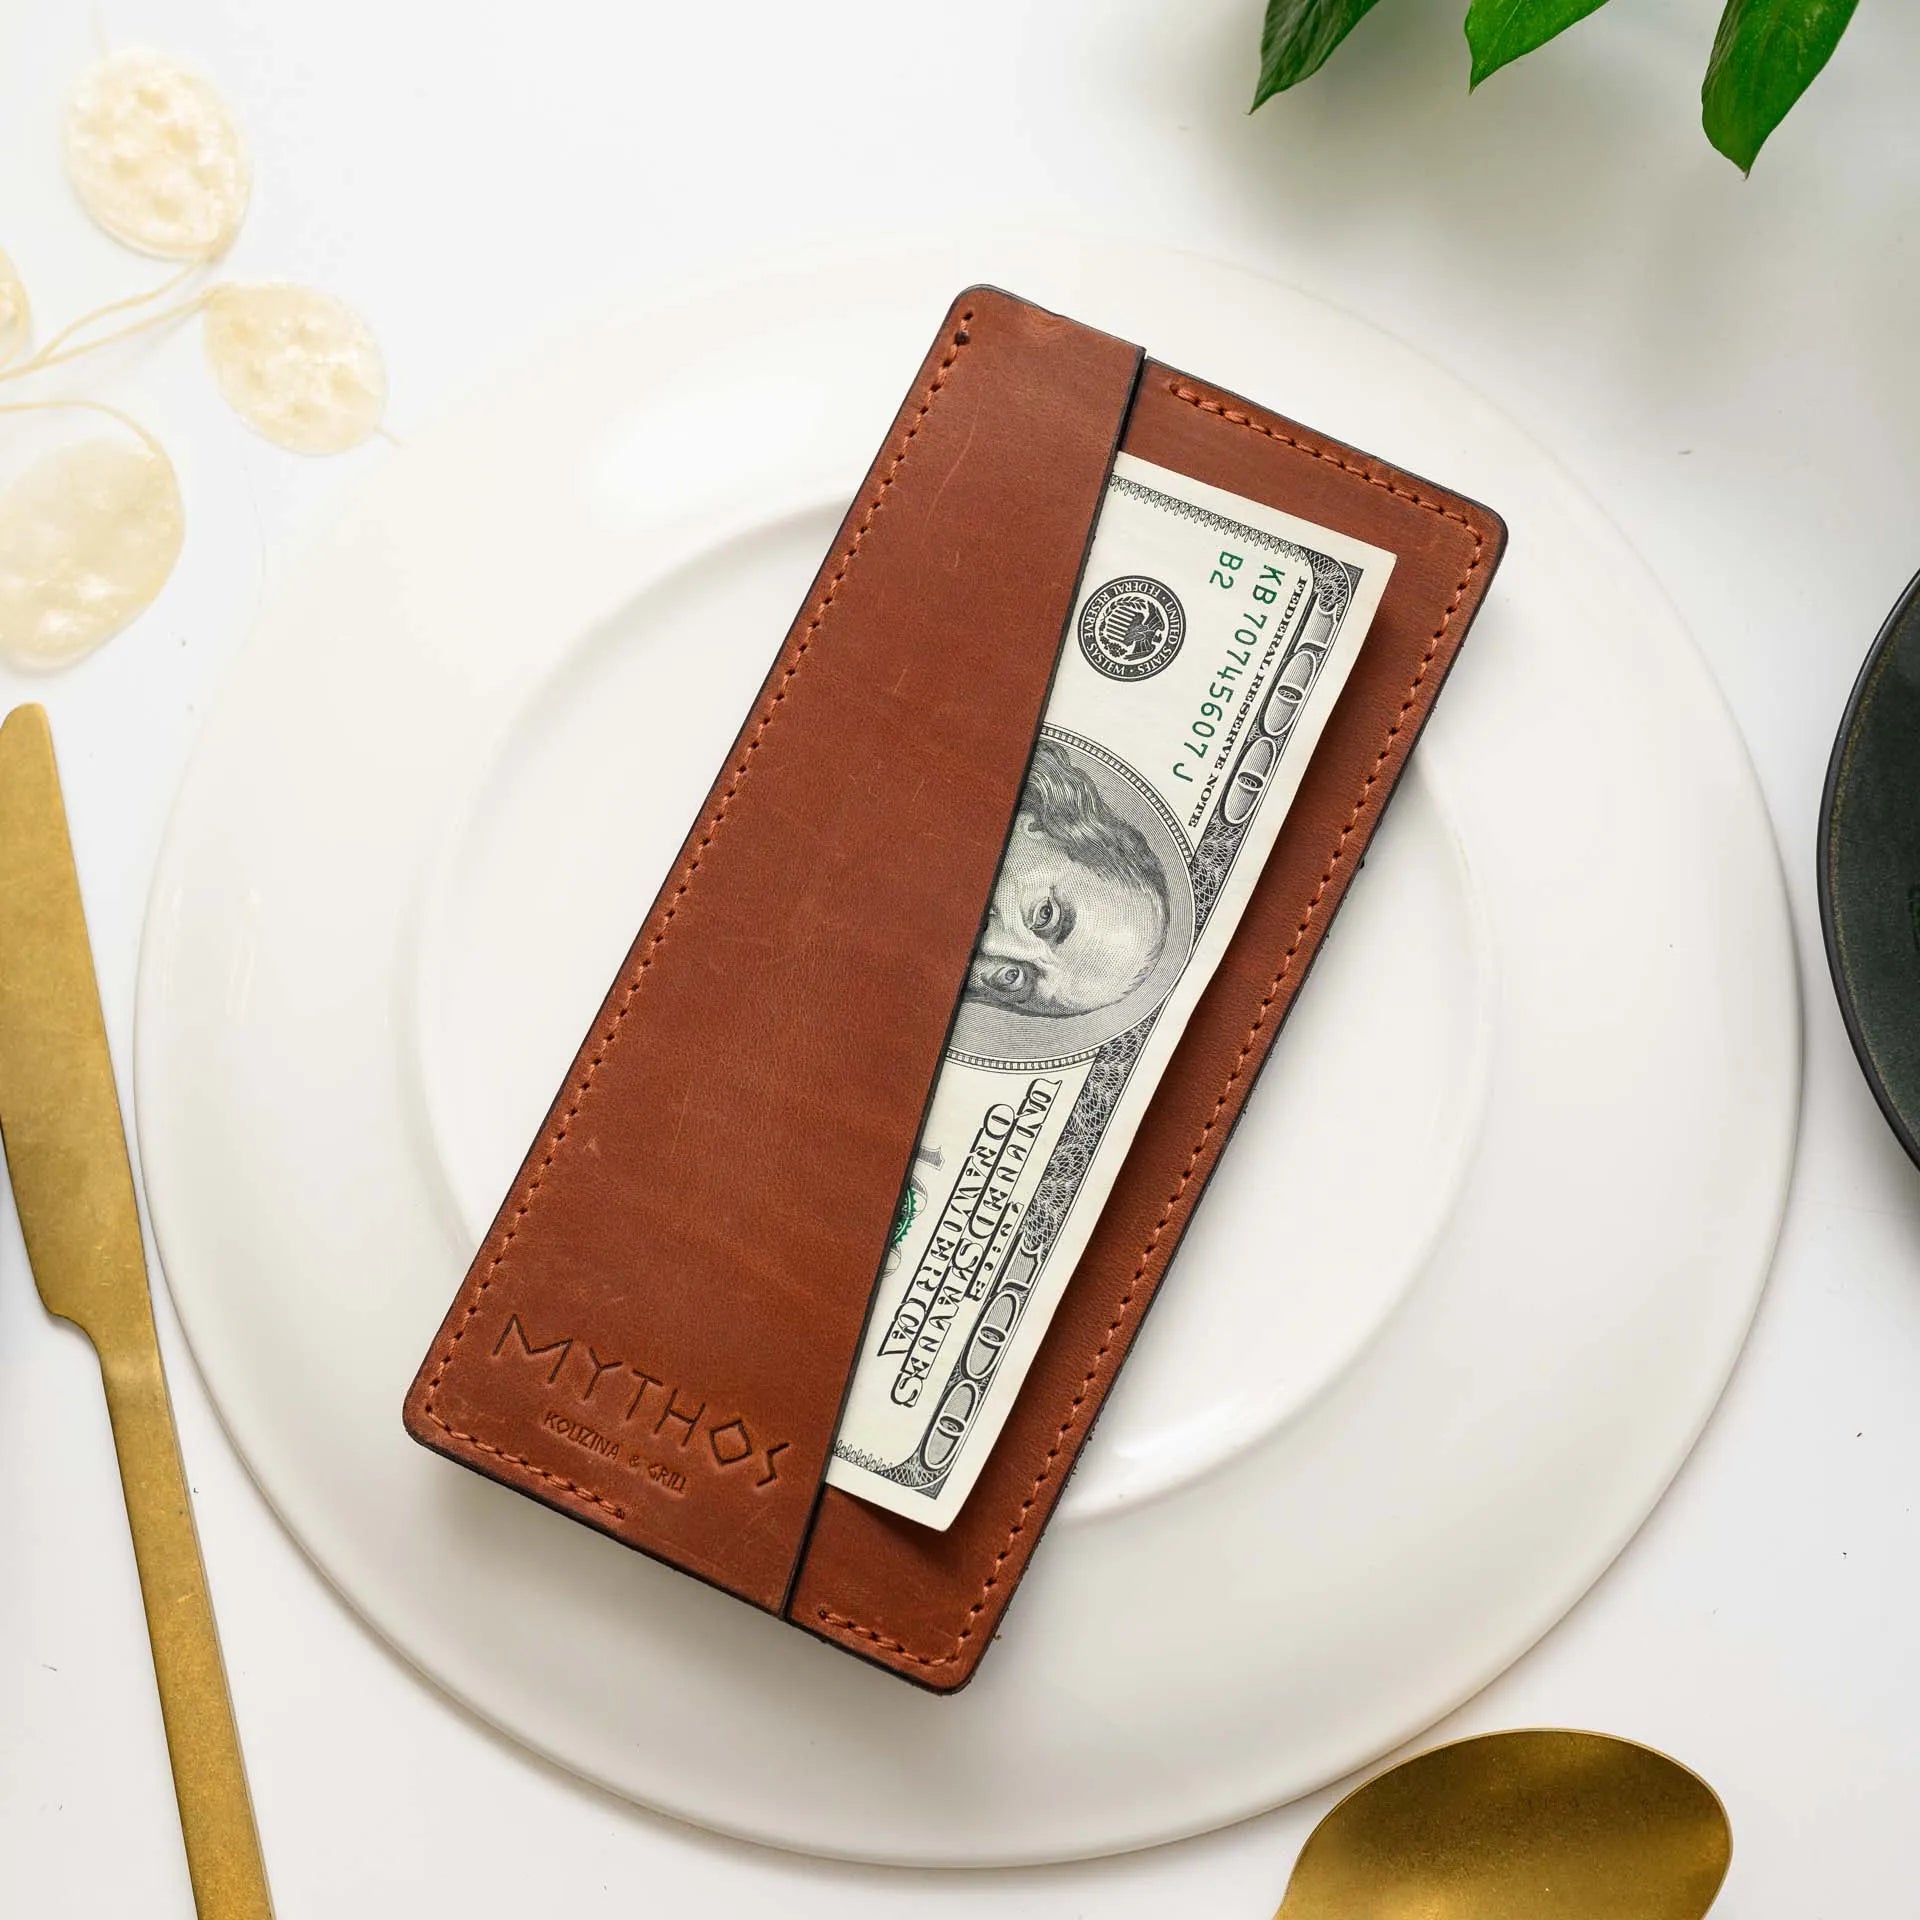 Check Holder For Restaurant: Keep checks secure and stylish with our premium leather check holder.